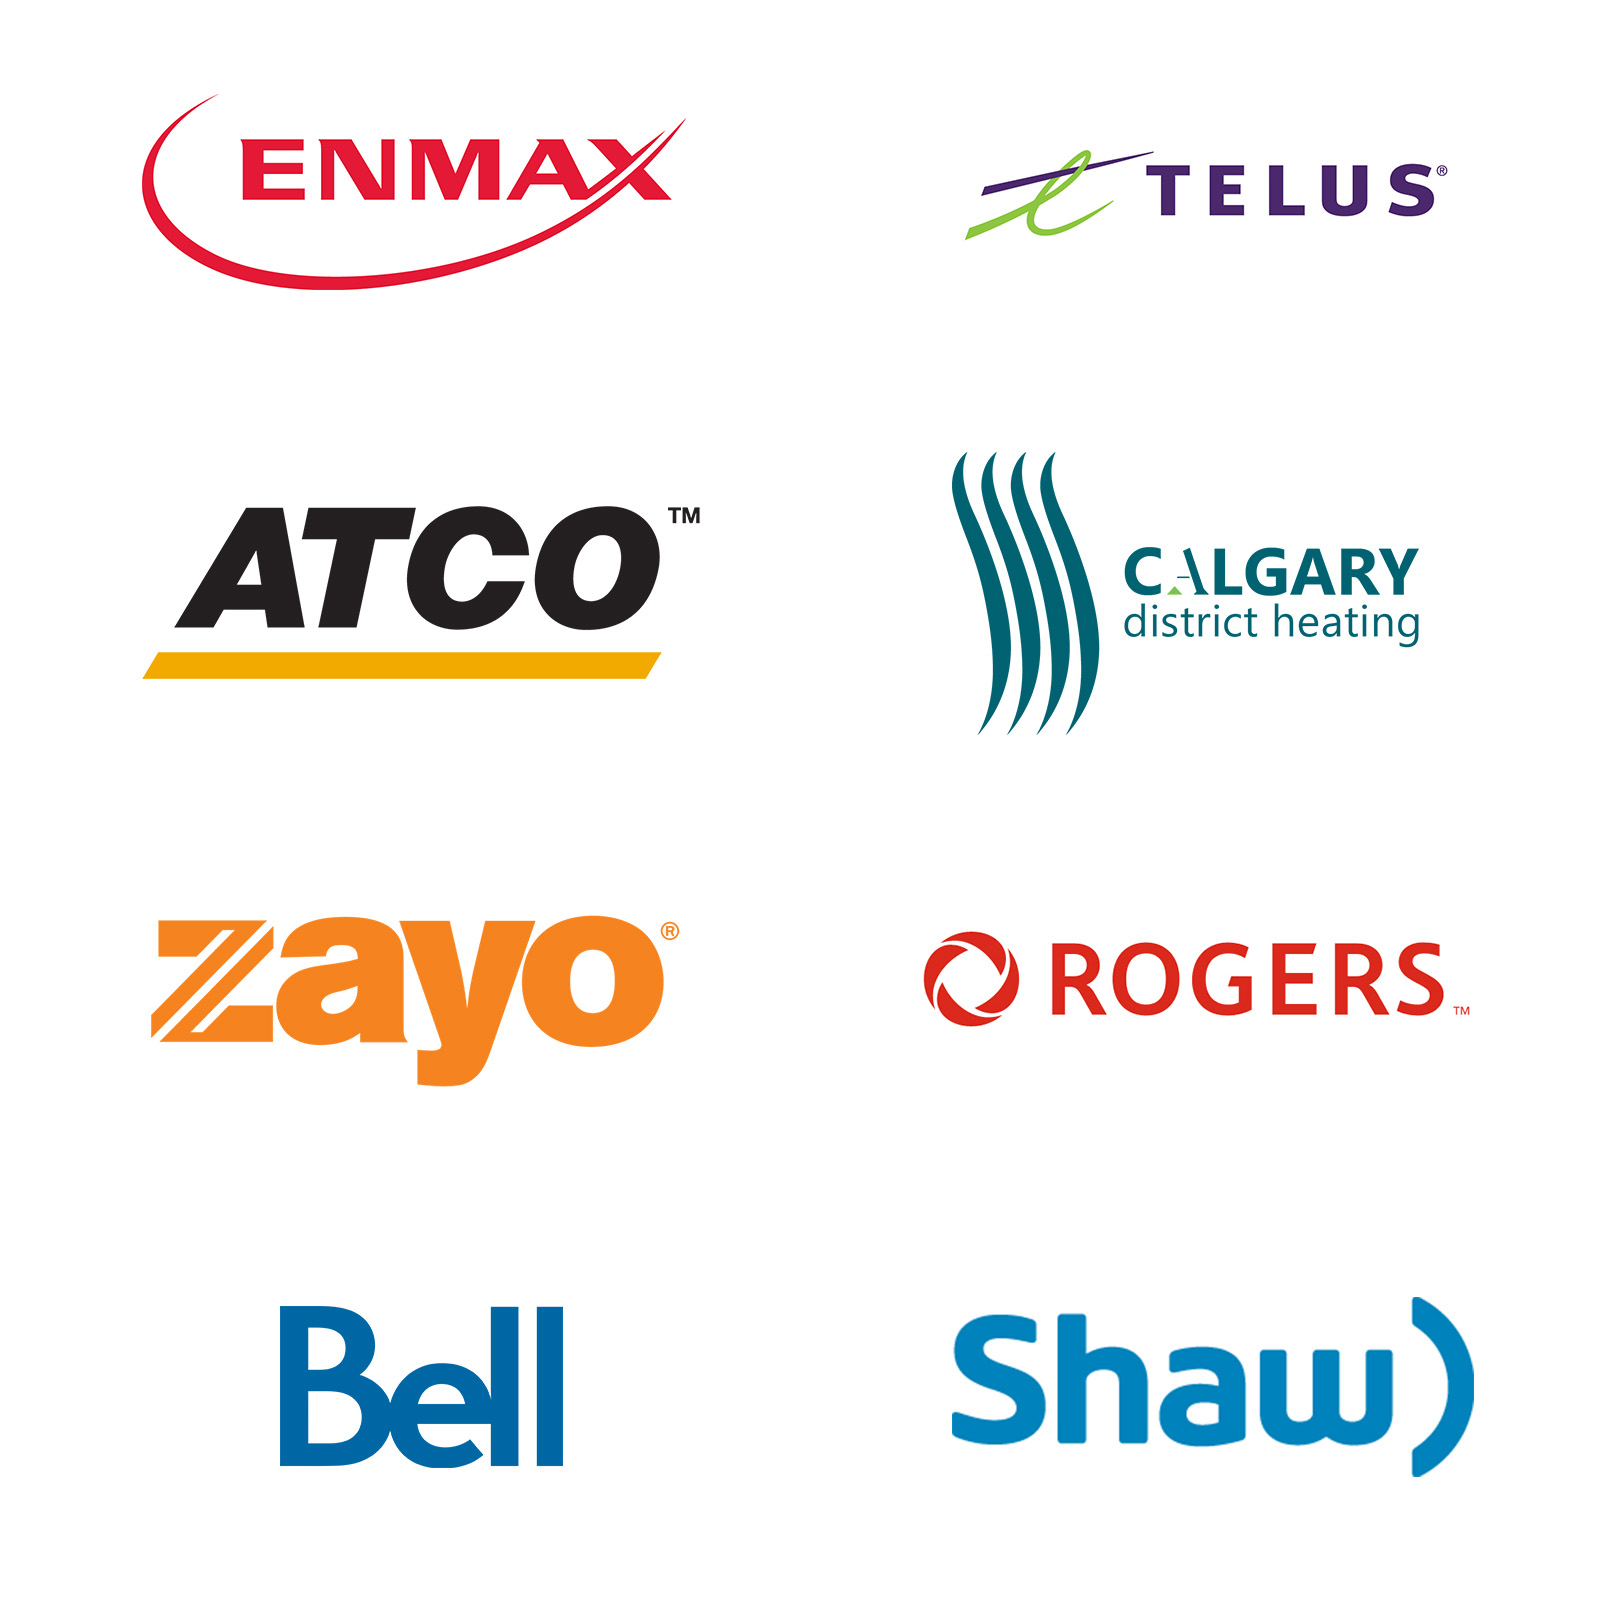 Logos of construction partners ENMAX, ATCO, Zayo, Bell, TELUS, Calgary District Heating, Rogers and Shaw